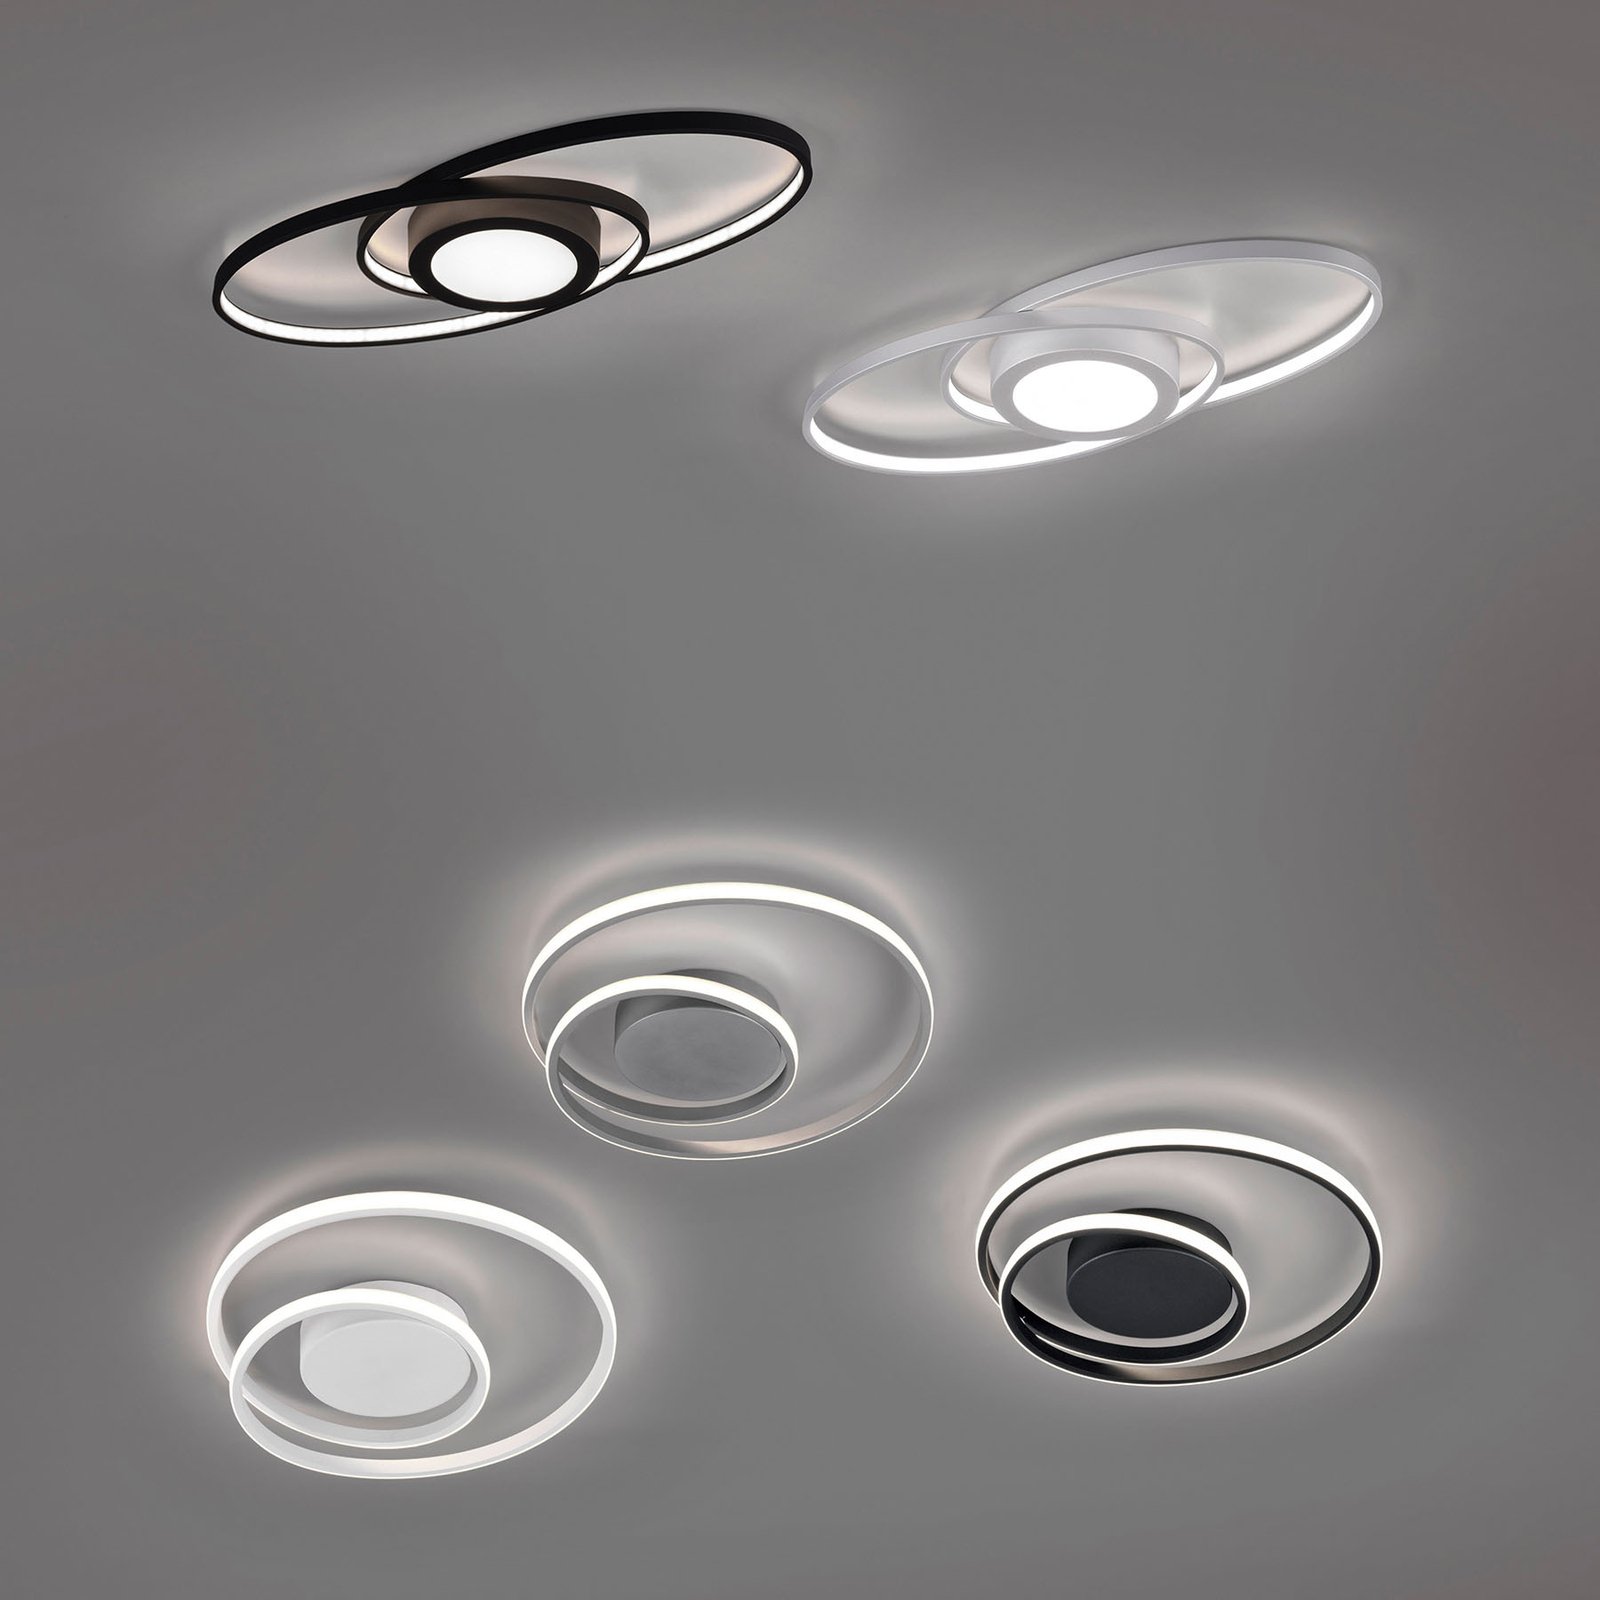 Plafonnier LED Galaxy, intensité lumineuse variable, anthracite